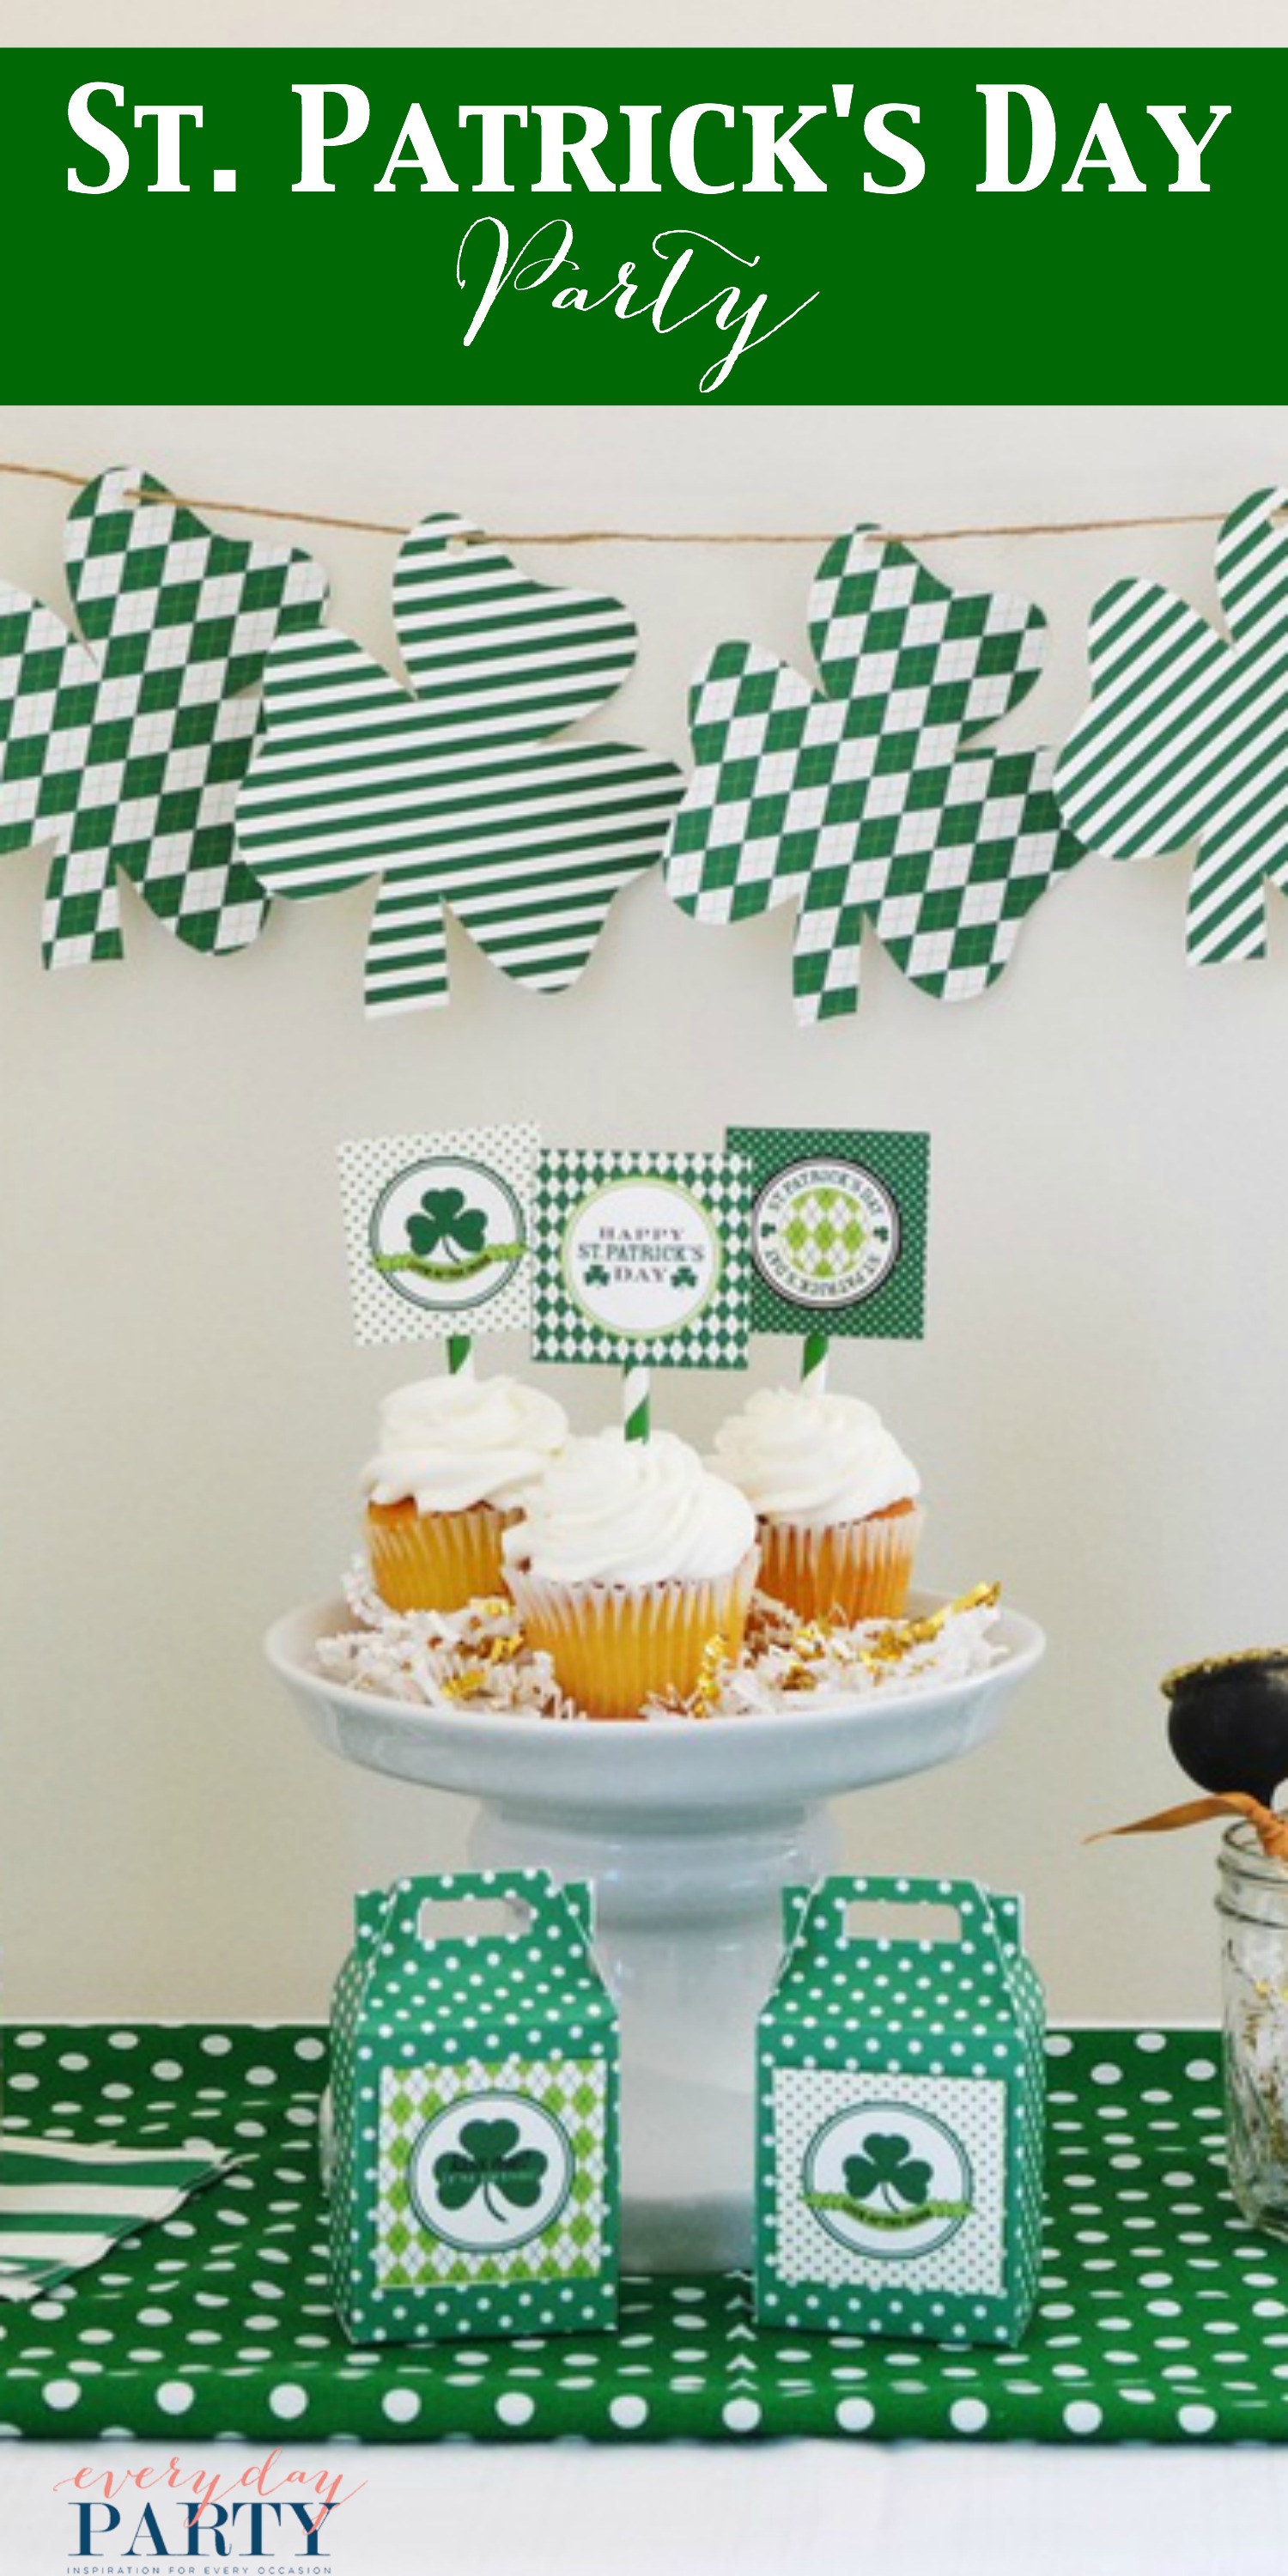 Everyday Party Magazine St. Patrick's Day Party by Sweet Threads Co.